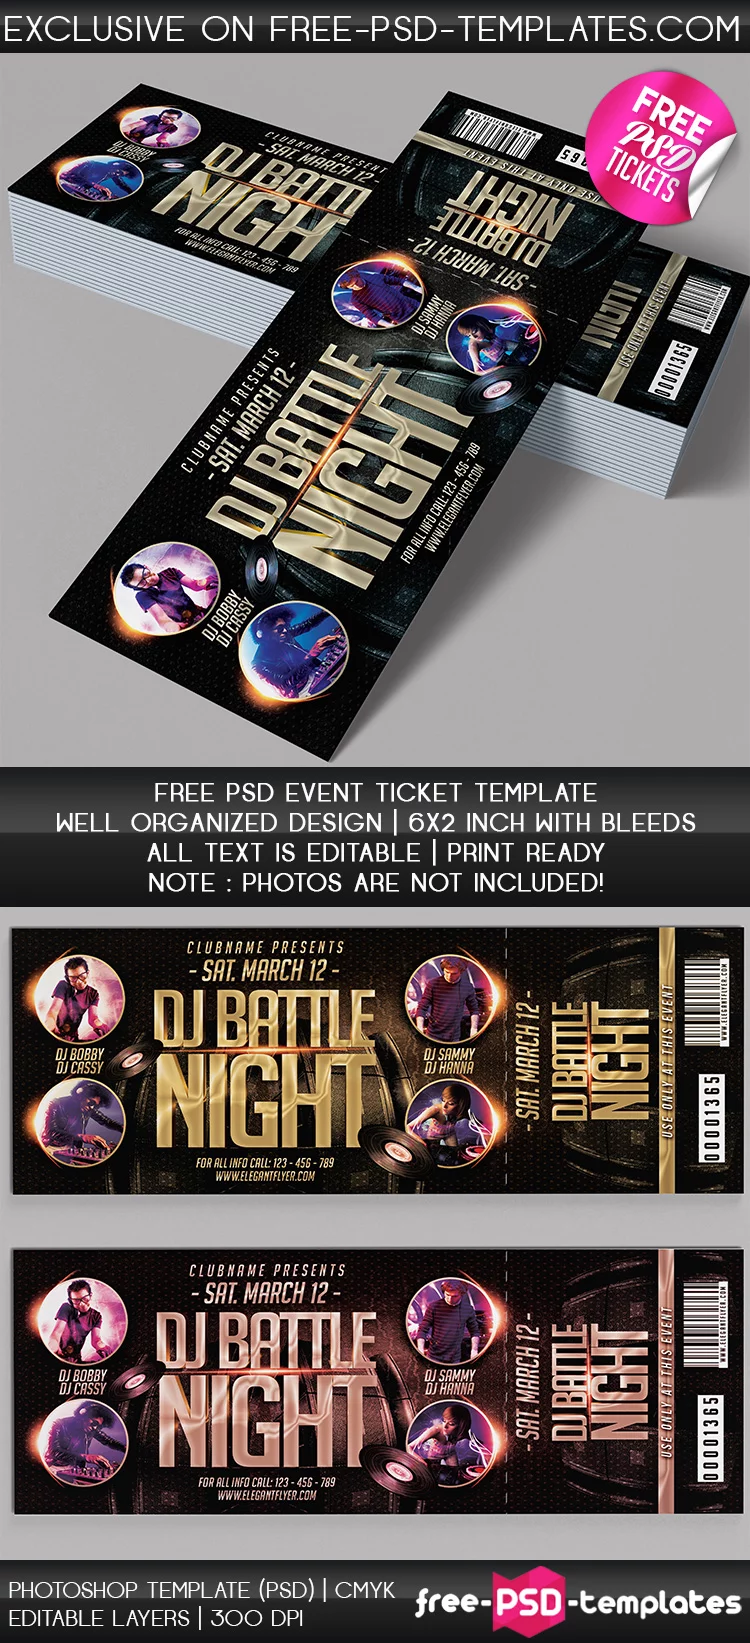 Preview_Free_PSD_event_tickets